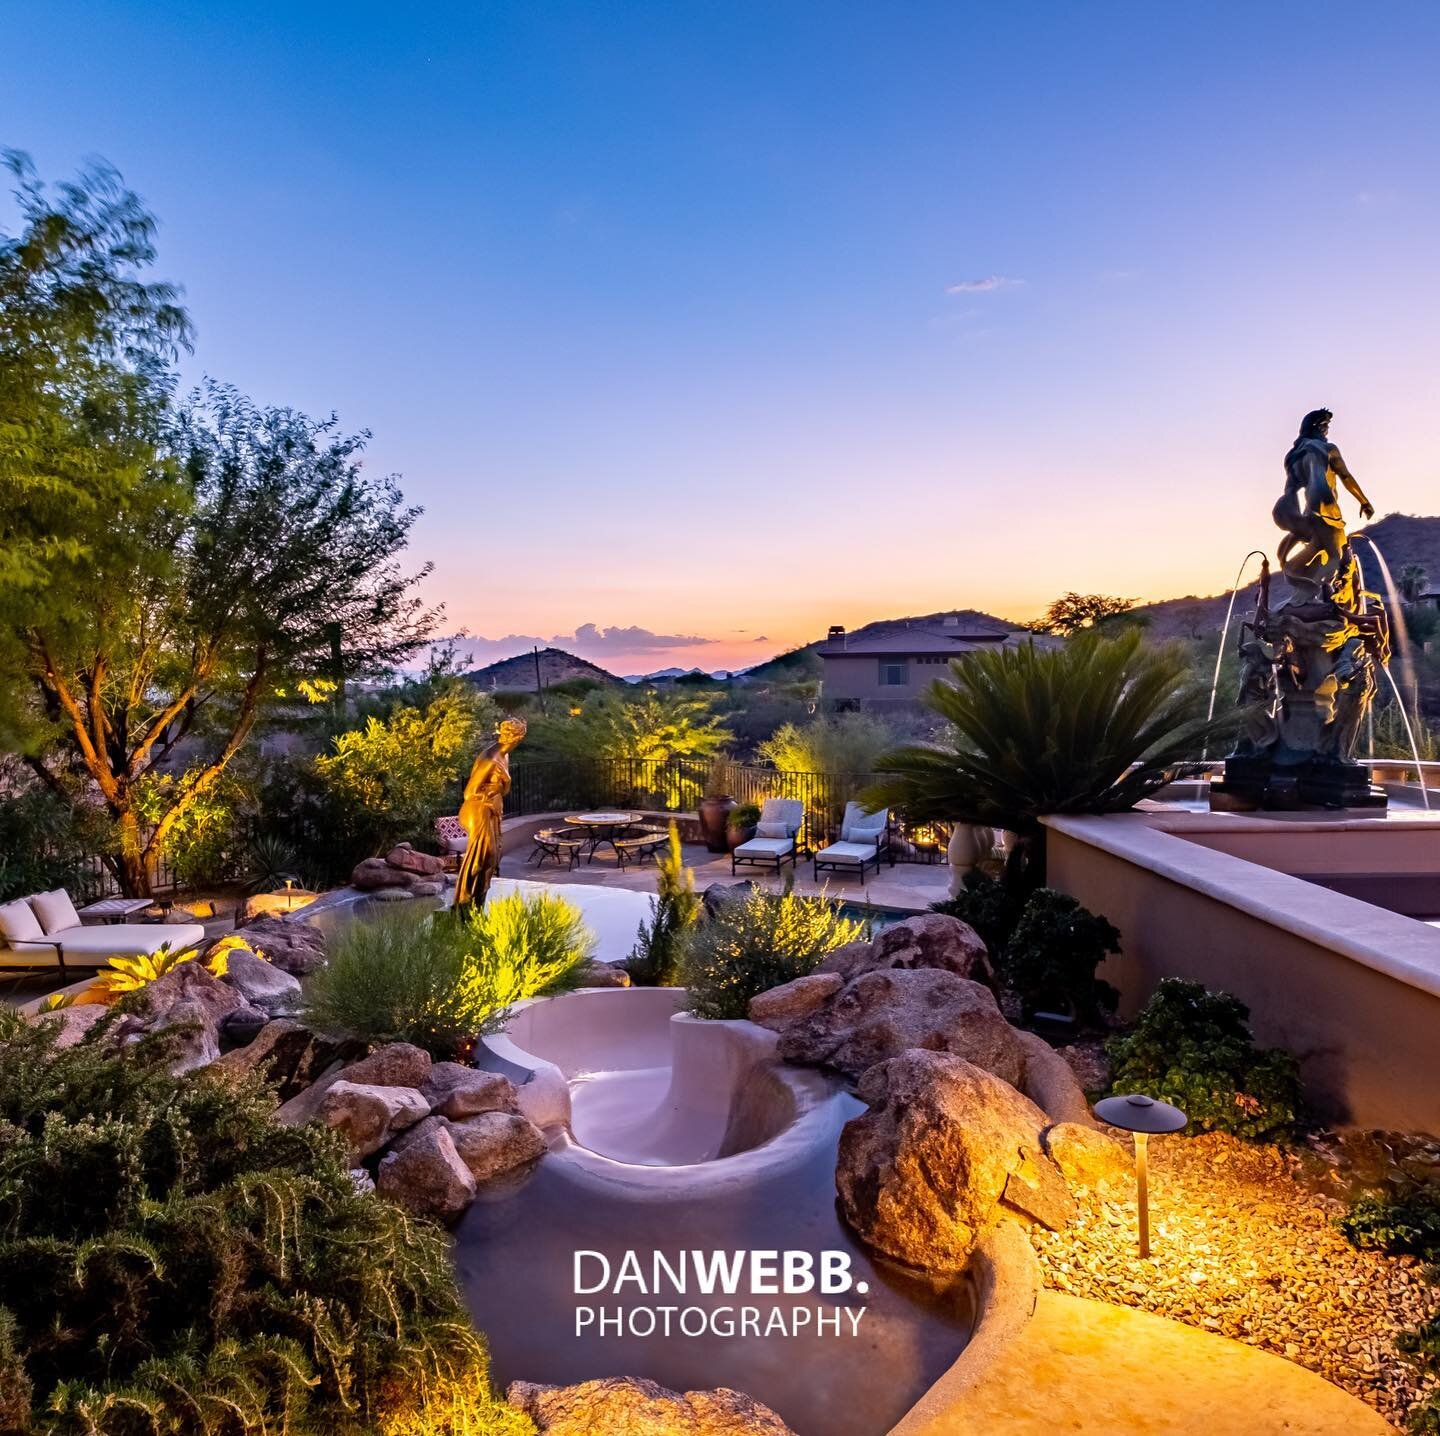 A few teasers from tonight&rsquo;s shoot. This is a $4.5M home, not listed yet (can&rsquo;t say where). Client has hired me for all images and videos for going to market. More to come! 

#azphotographer #azphotography #gilbert #azrealestate #arizonap